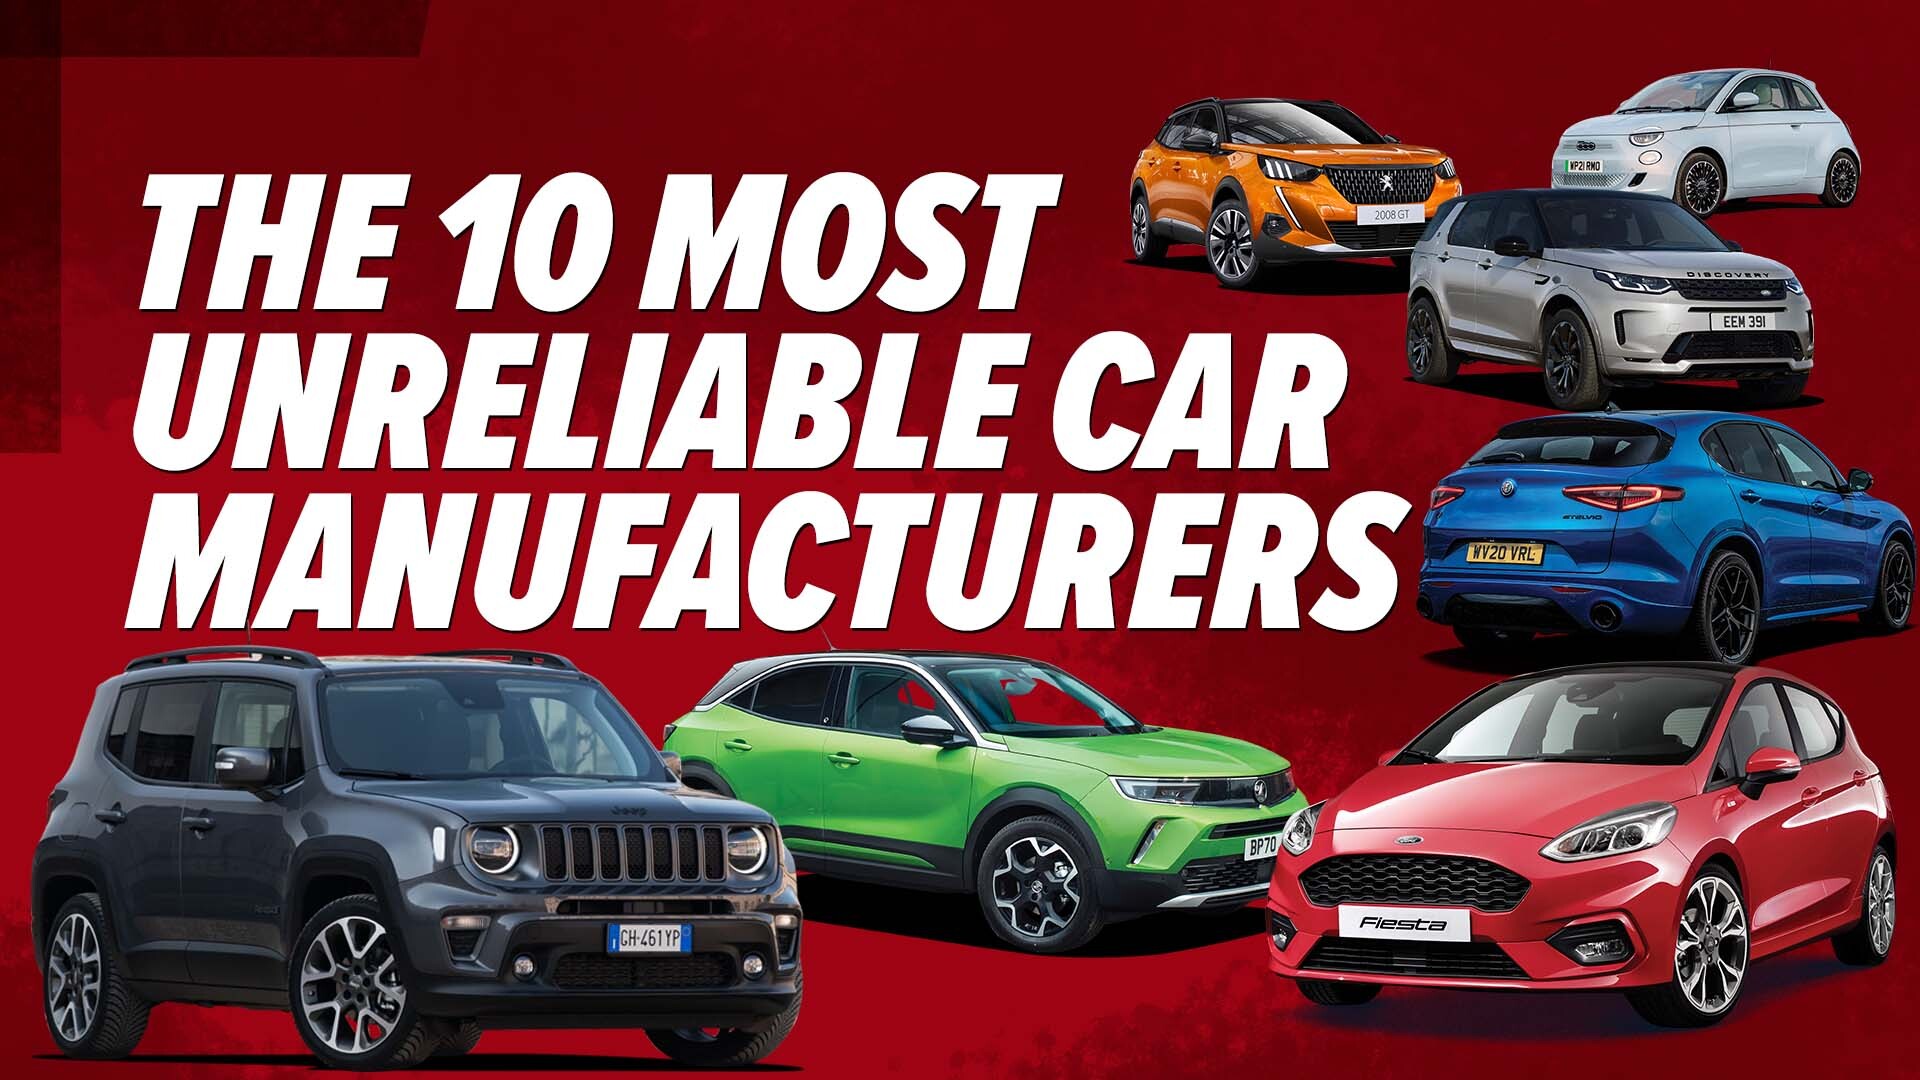 Jeep named the most unreliable used car brand as top 10 worst